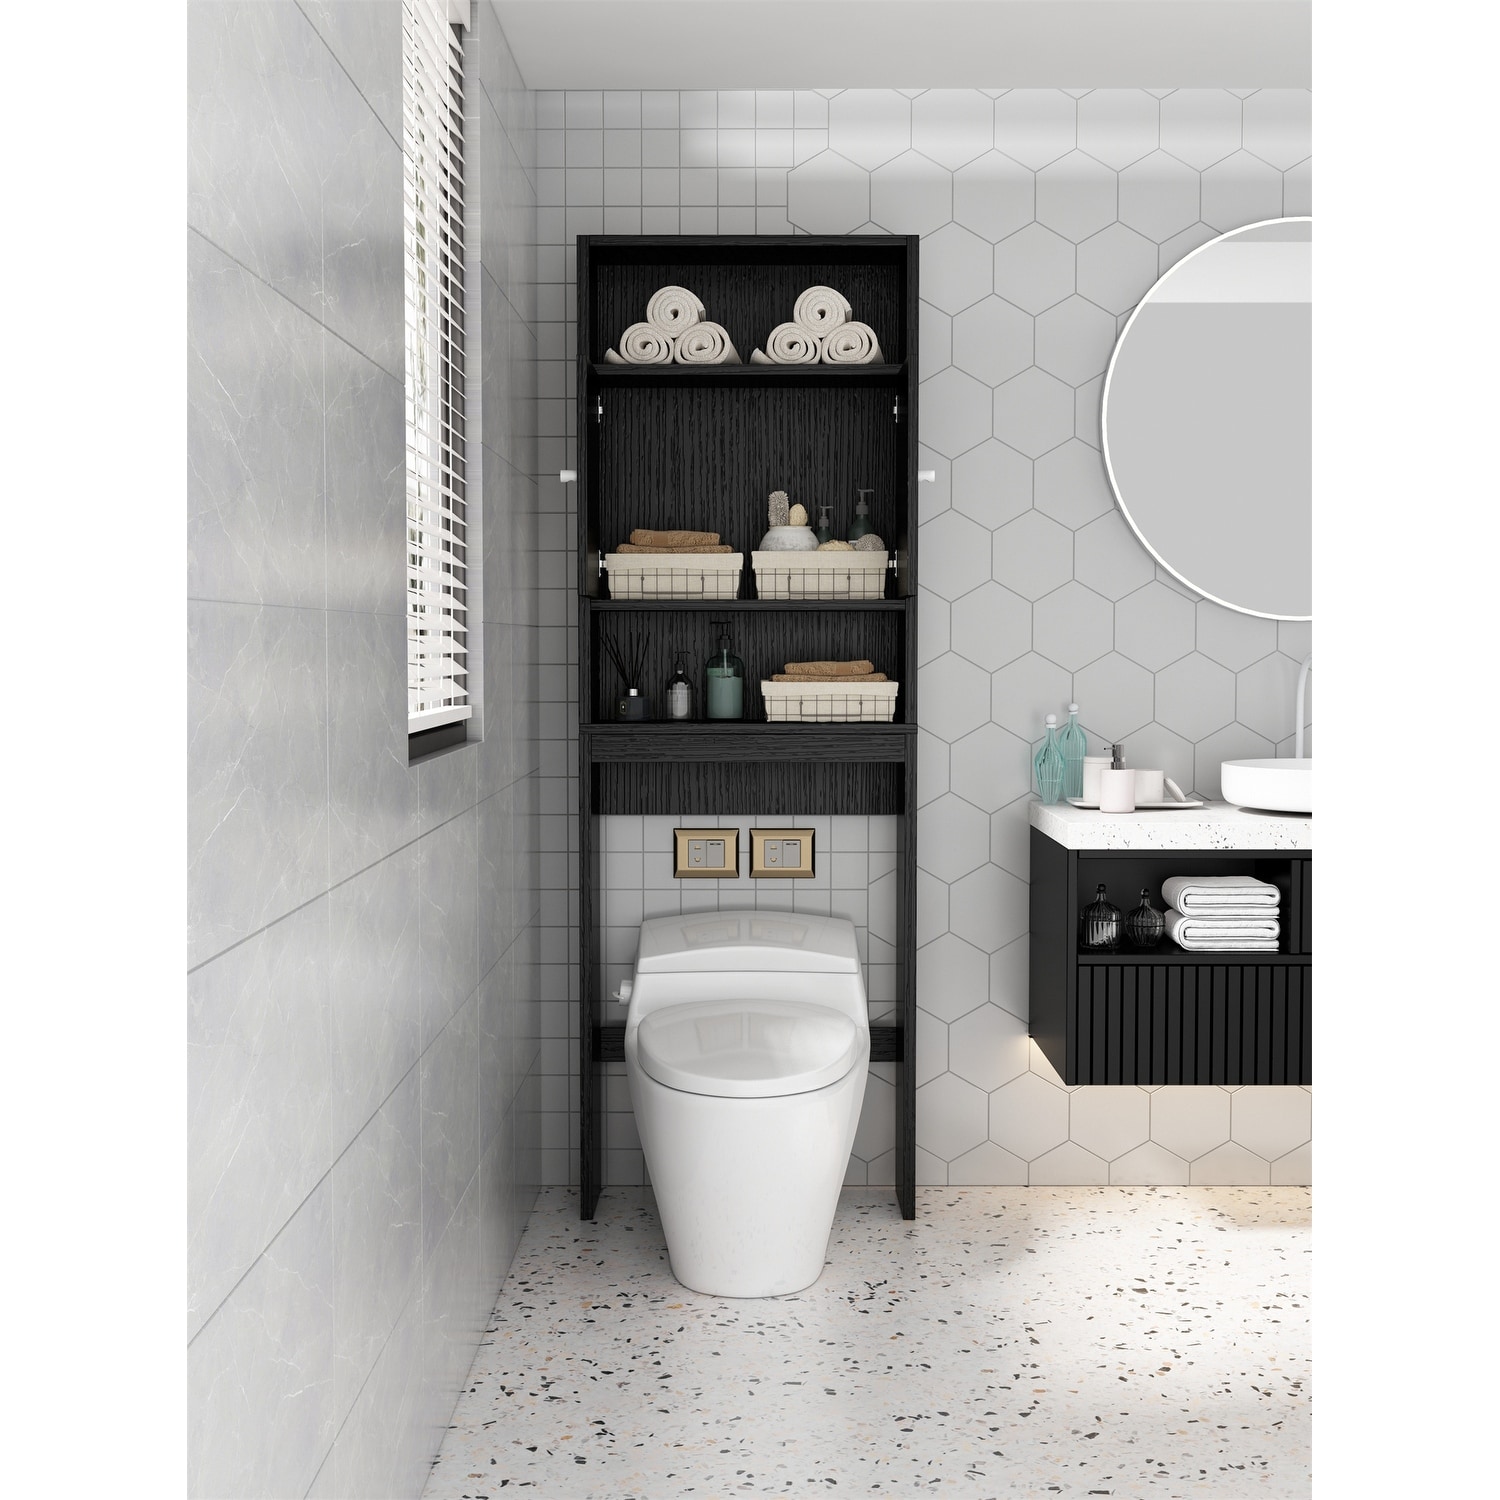 https://ak1.ostkcdn.com/images/products/is/images/direct/6a032bcb904eb9354b06f031b77f2973733e2147/Black-Toilet-Standing-Cabinet-Accent-Cabinet-Gap-Storage-Paper-Holder.jpg